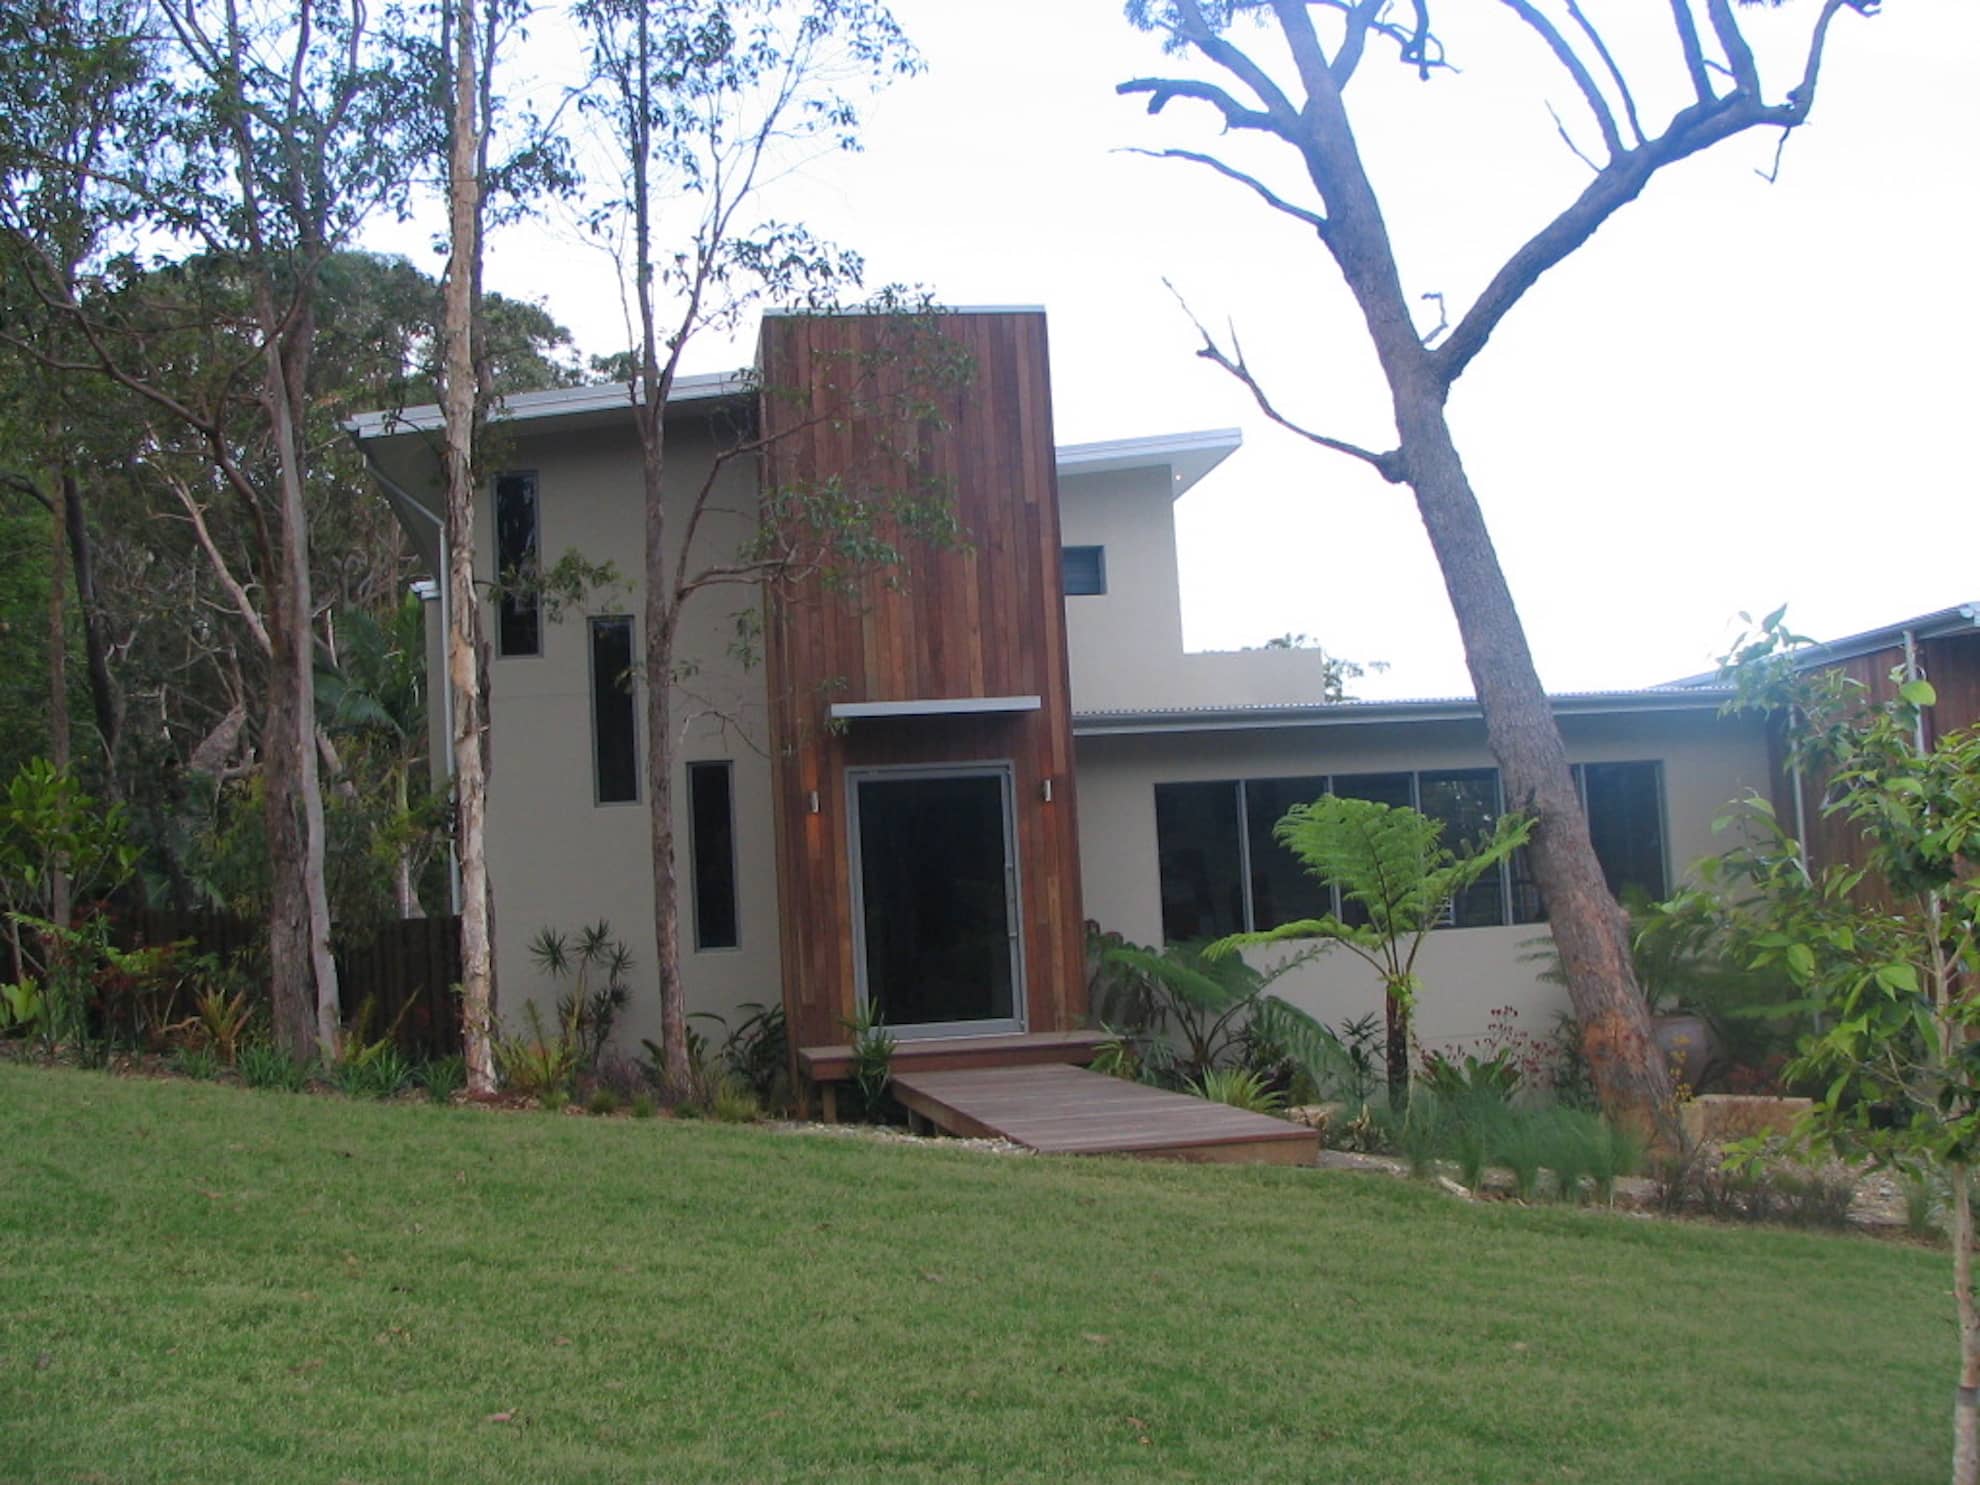 Birdhaven Close project by mdesign, a building design practice that operates on the Sunshine Coast.